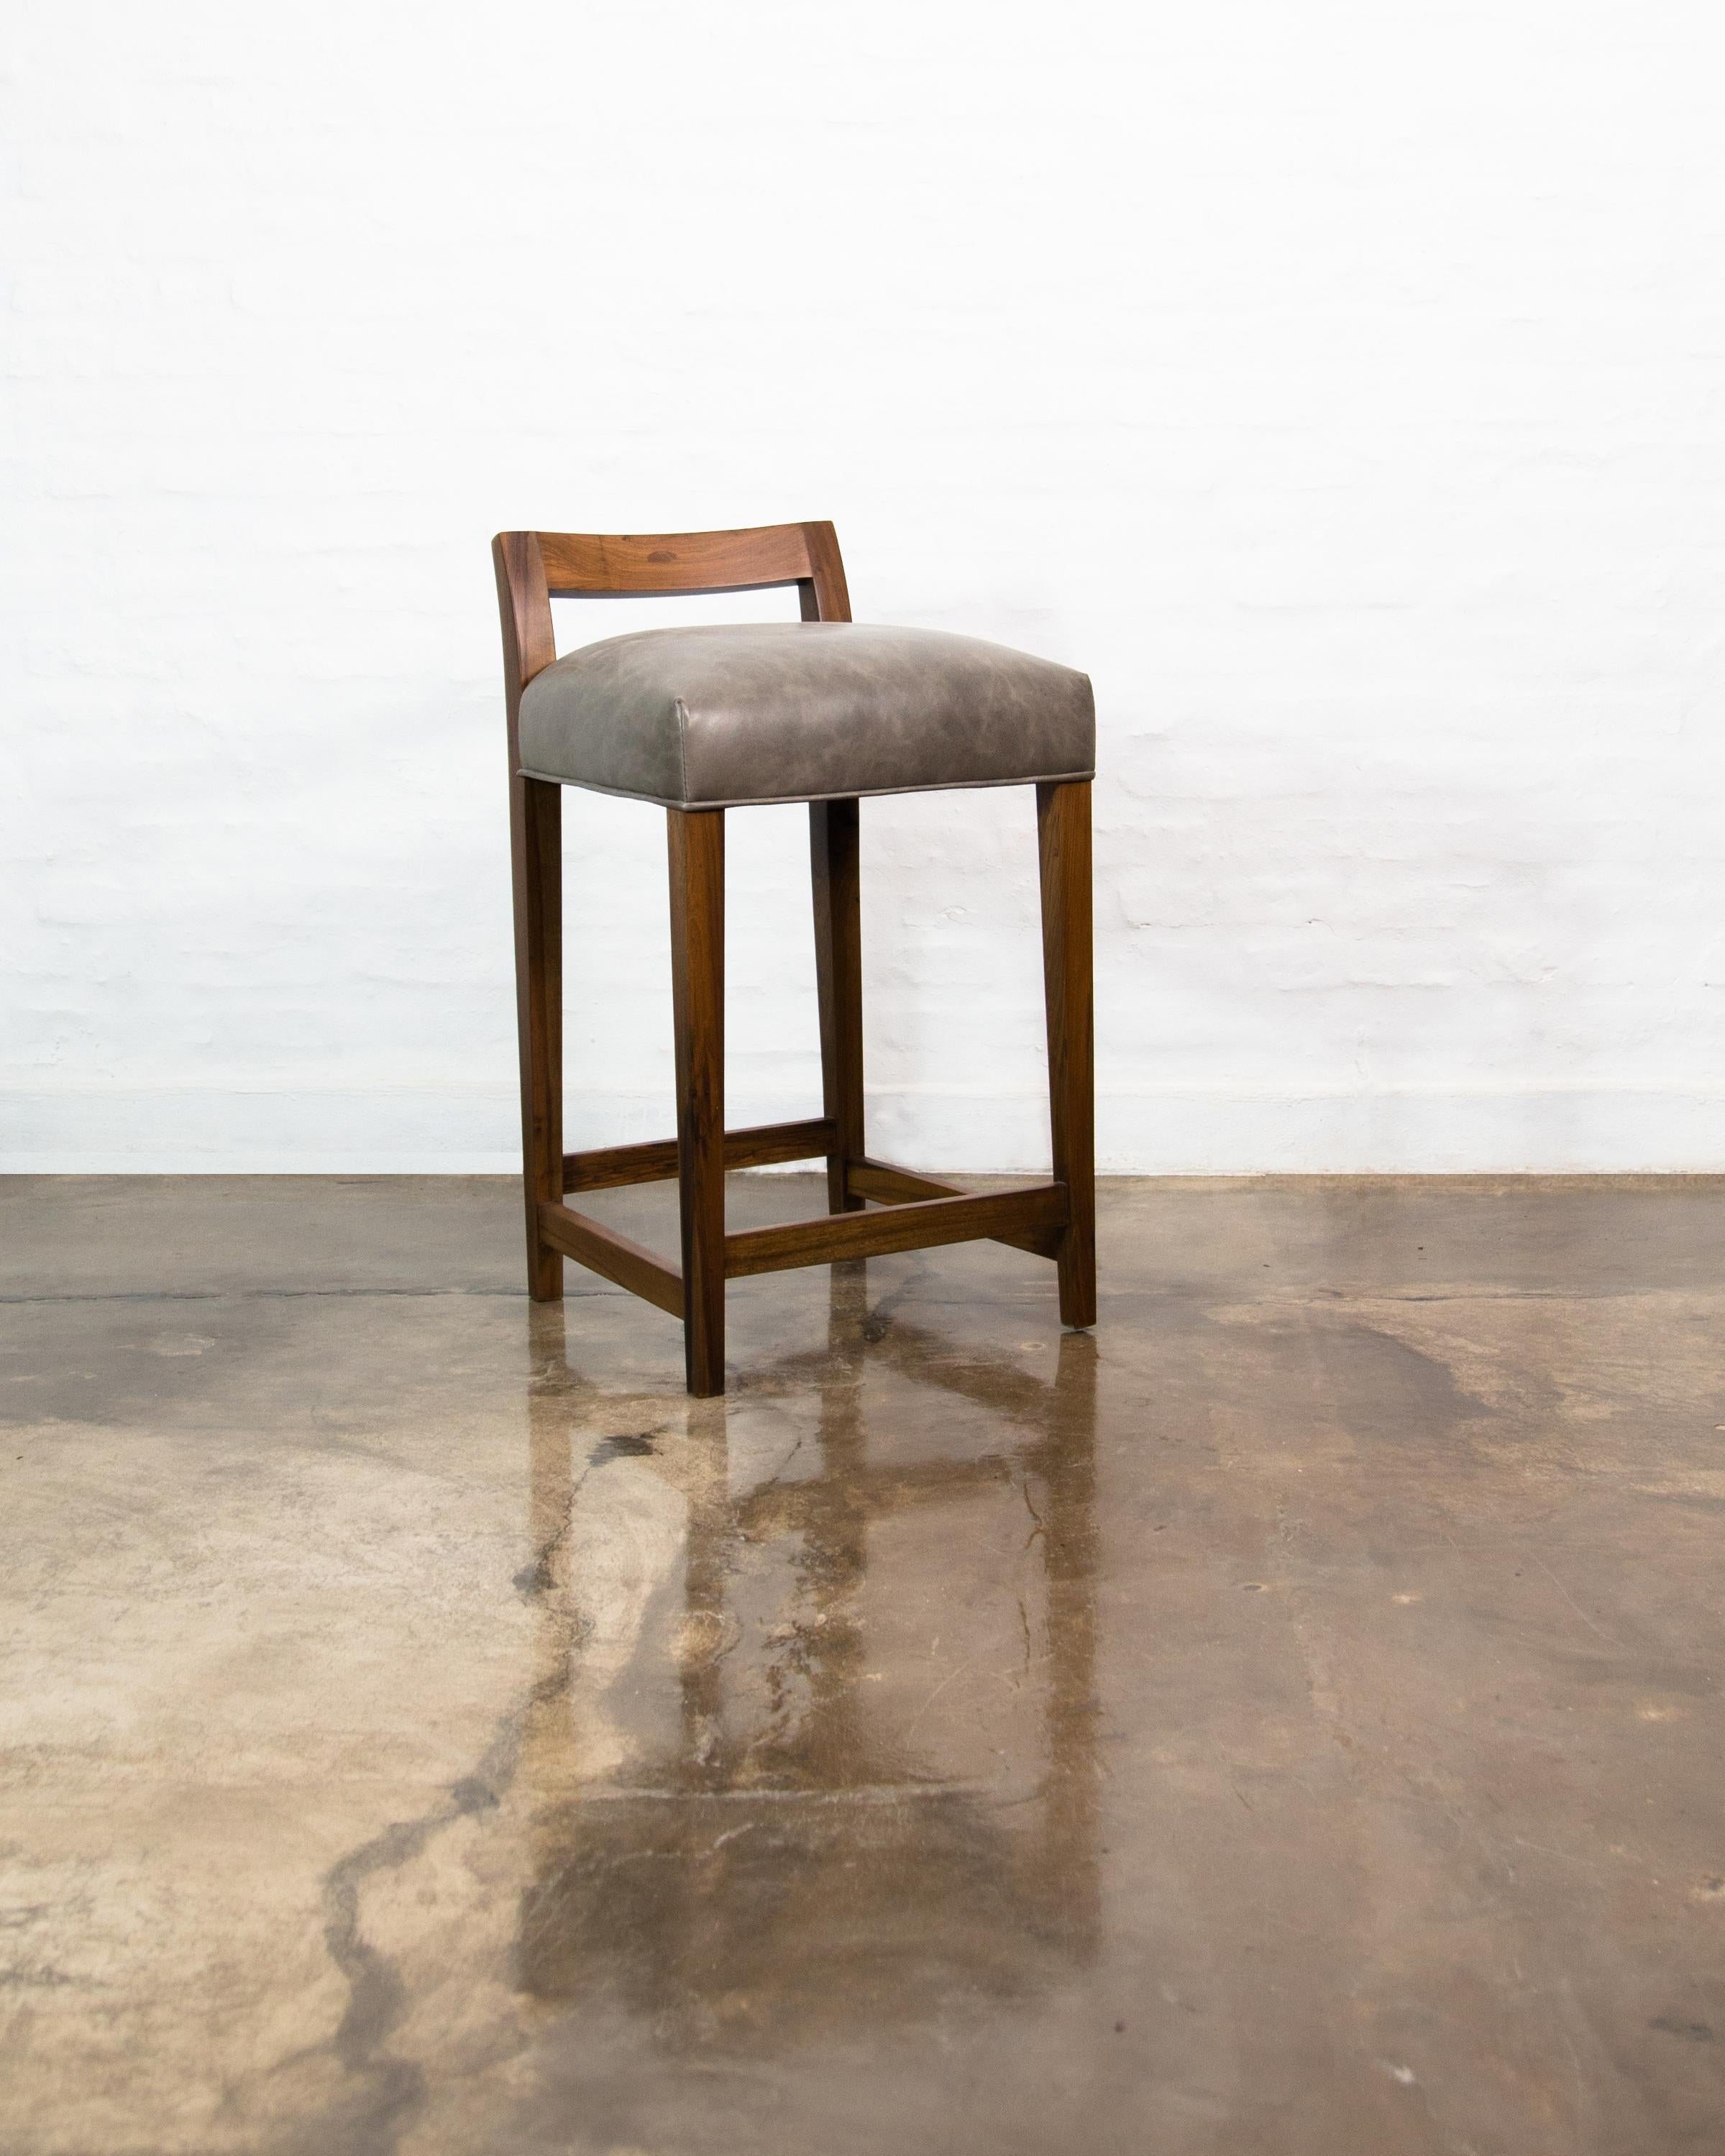 The Umberto counter stool is one of Costantini’s original seating designs, featuring a modern, low, carved solid wood back with a tight seat, and optional burnished bronze footrest. Available in several standard kinds of leather as well as COM/COL.